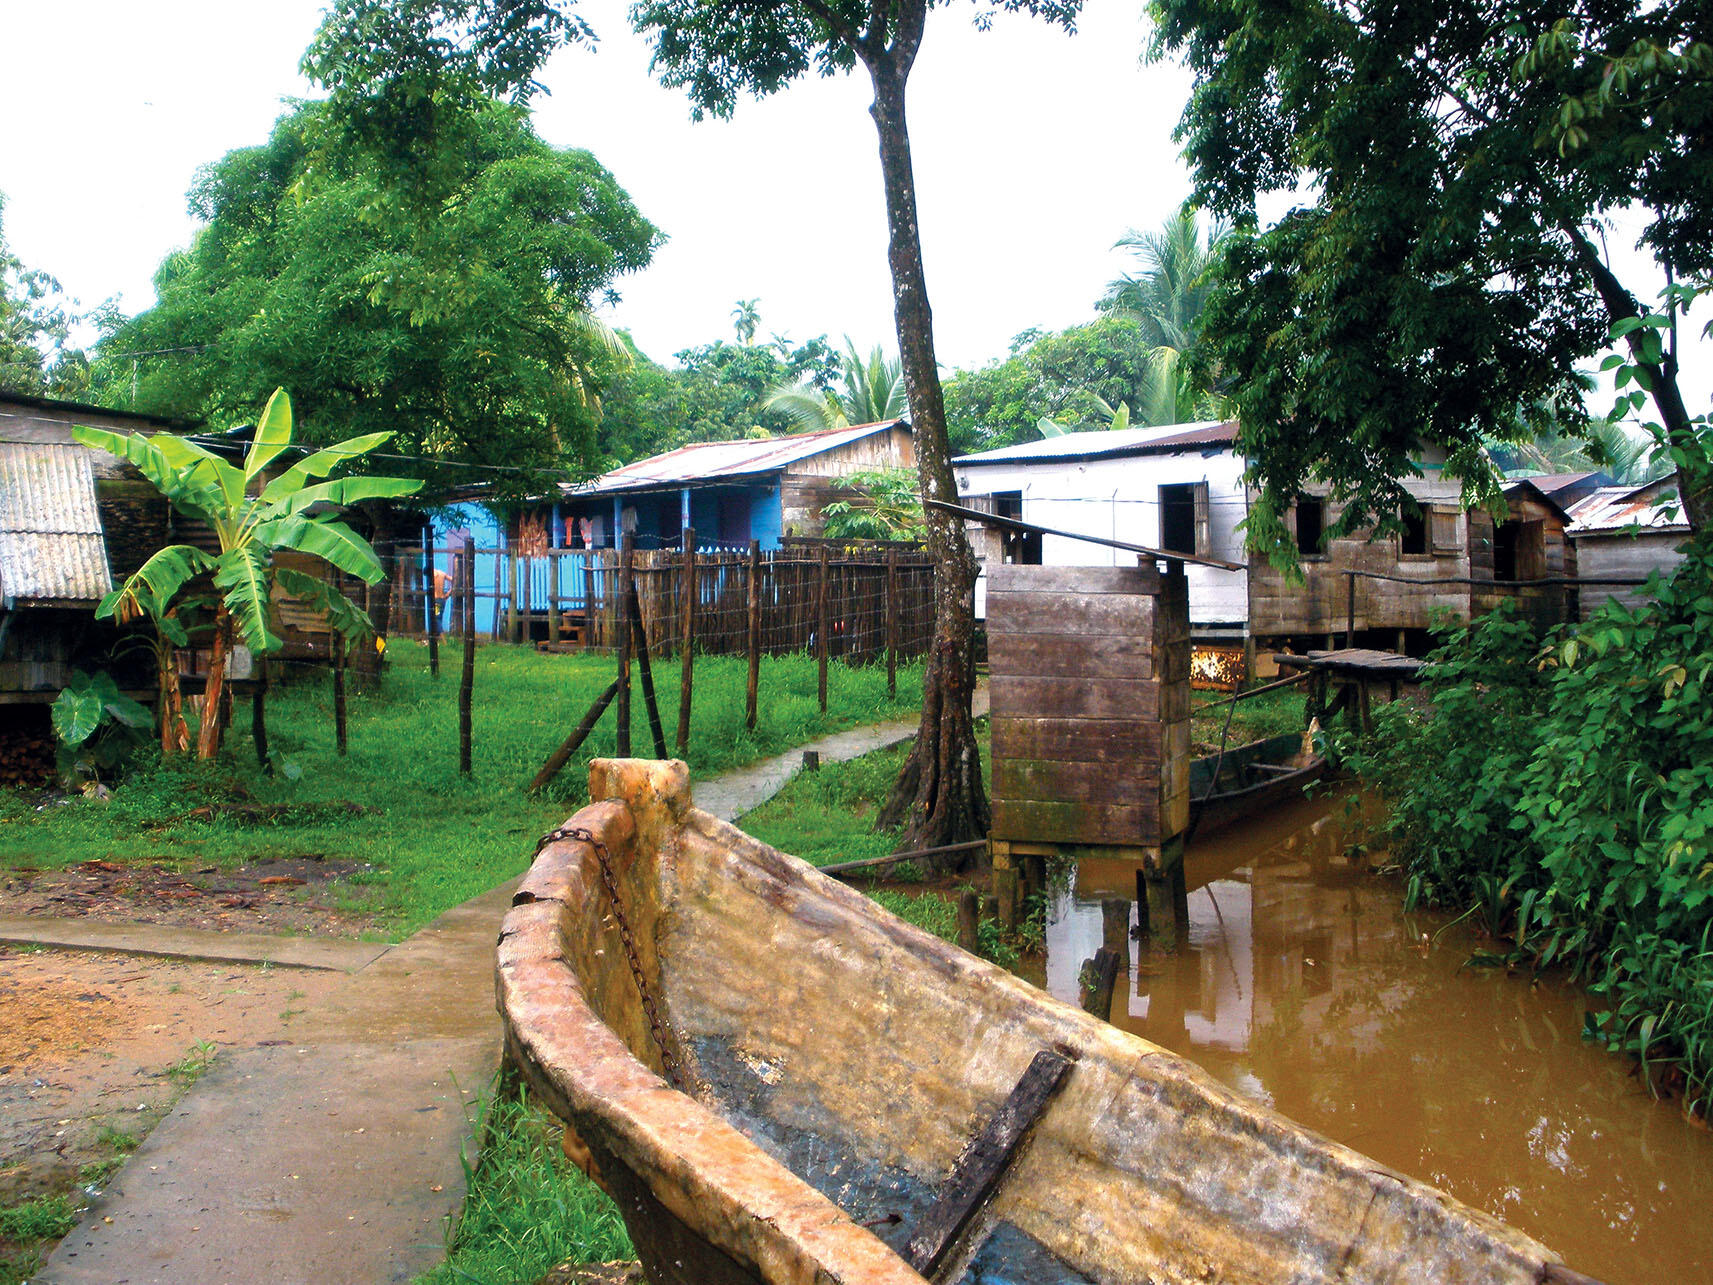 Outhouses are poised above canals, draining untreated waste into waterways in Nicaragua. (Photo courtesy of blueEnergy.)